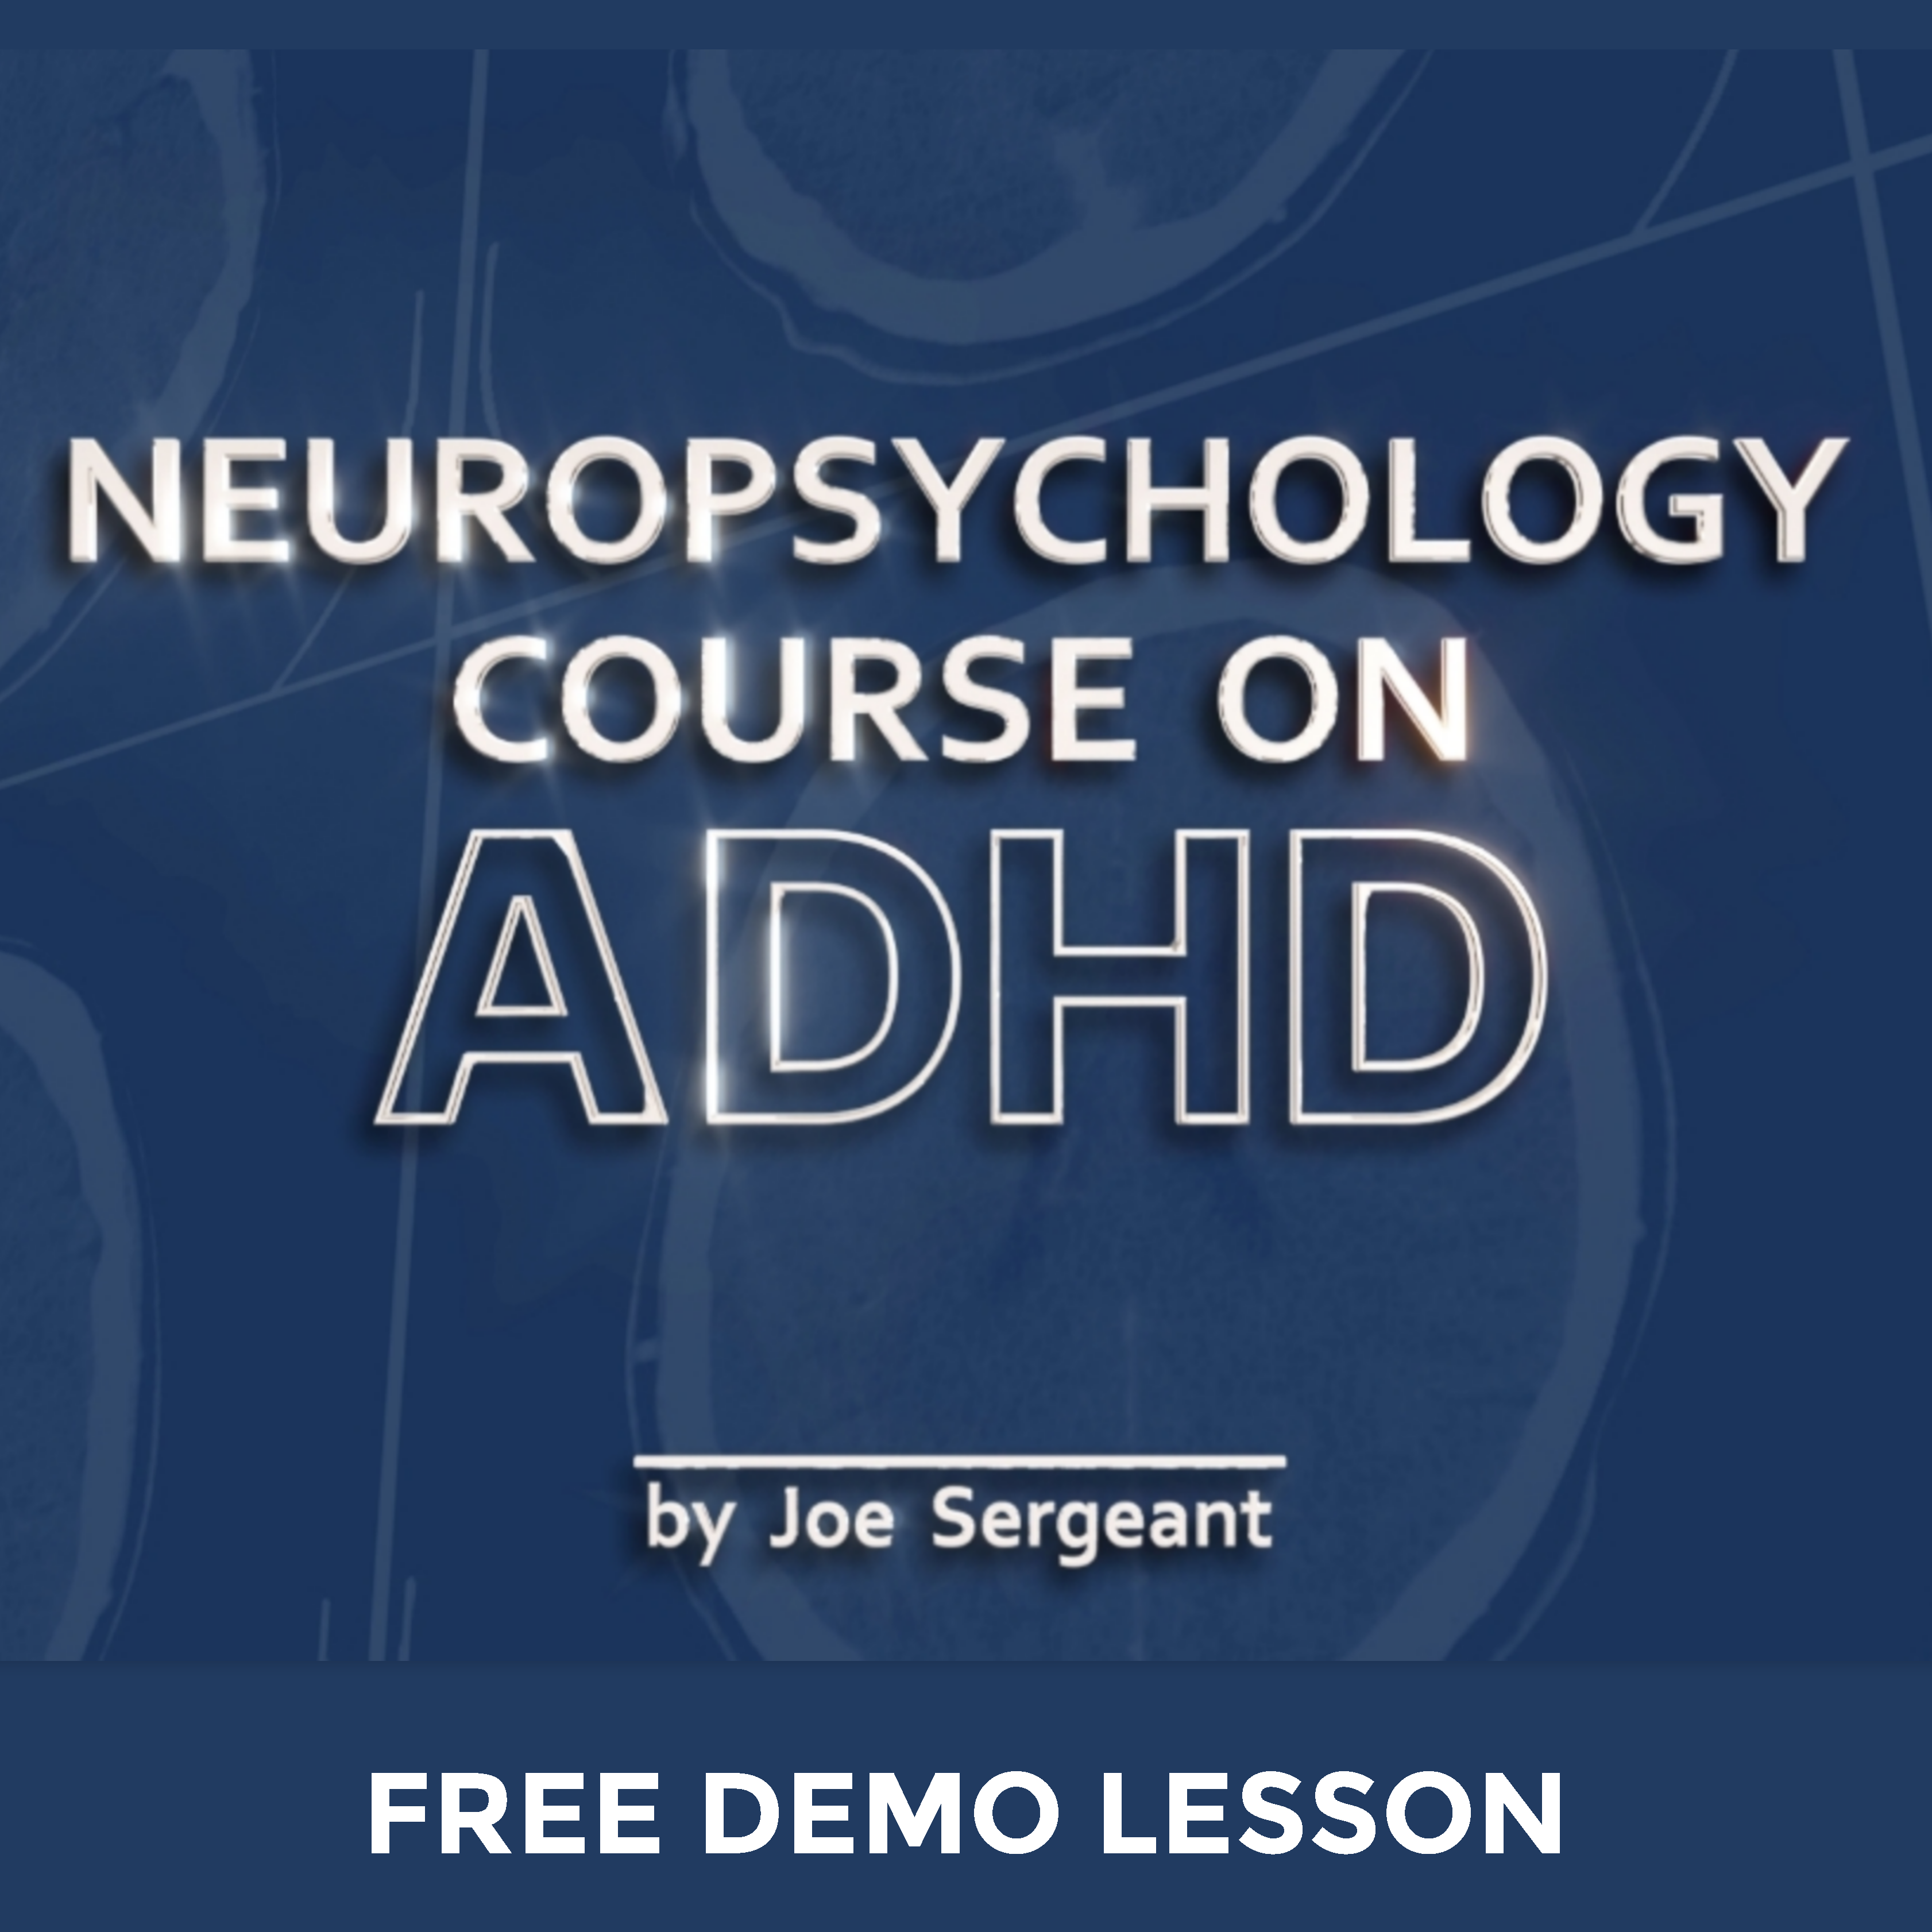 Neuropsychology Course on ADHD - FREE DEMO LESSON